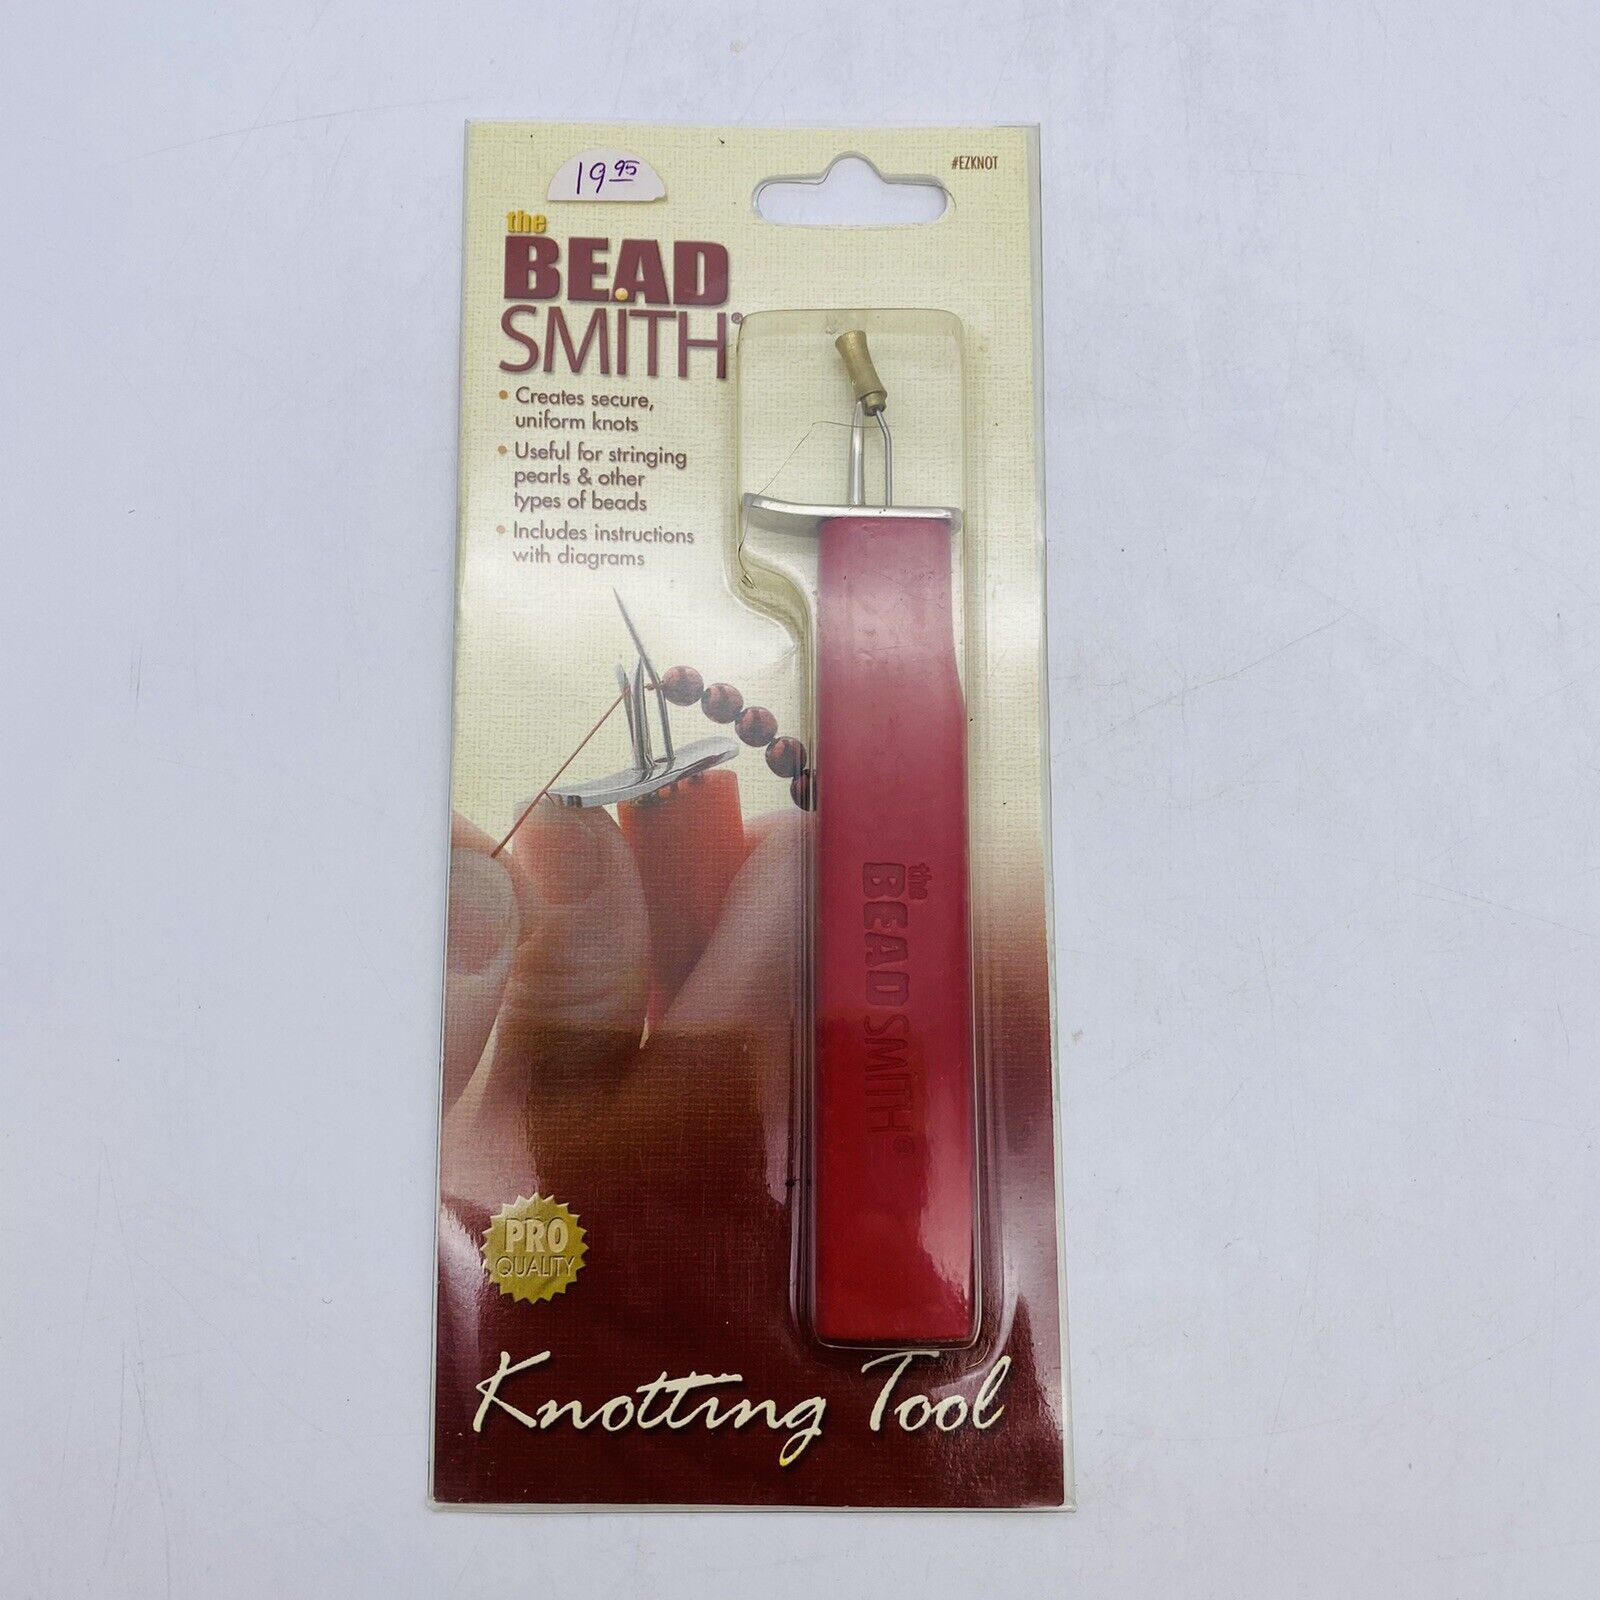 1 Bead Smith Knotting Tool To Knot Pearls & Beads Professionally & Quickly